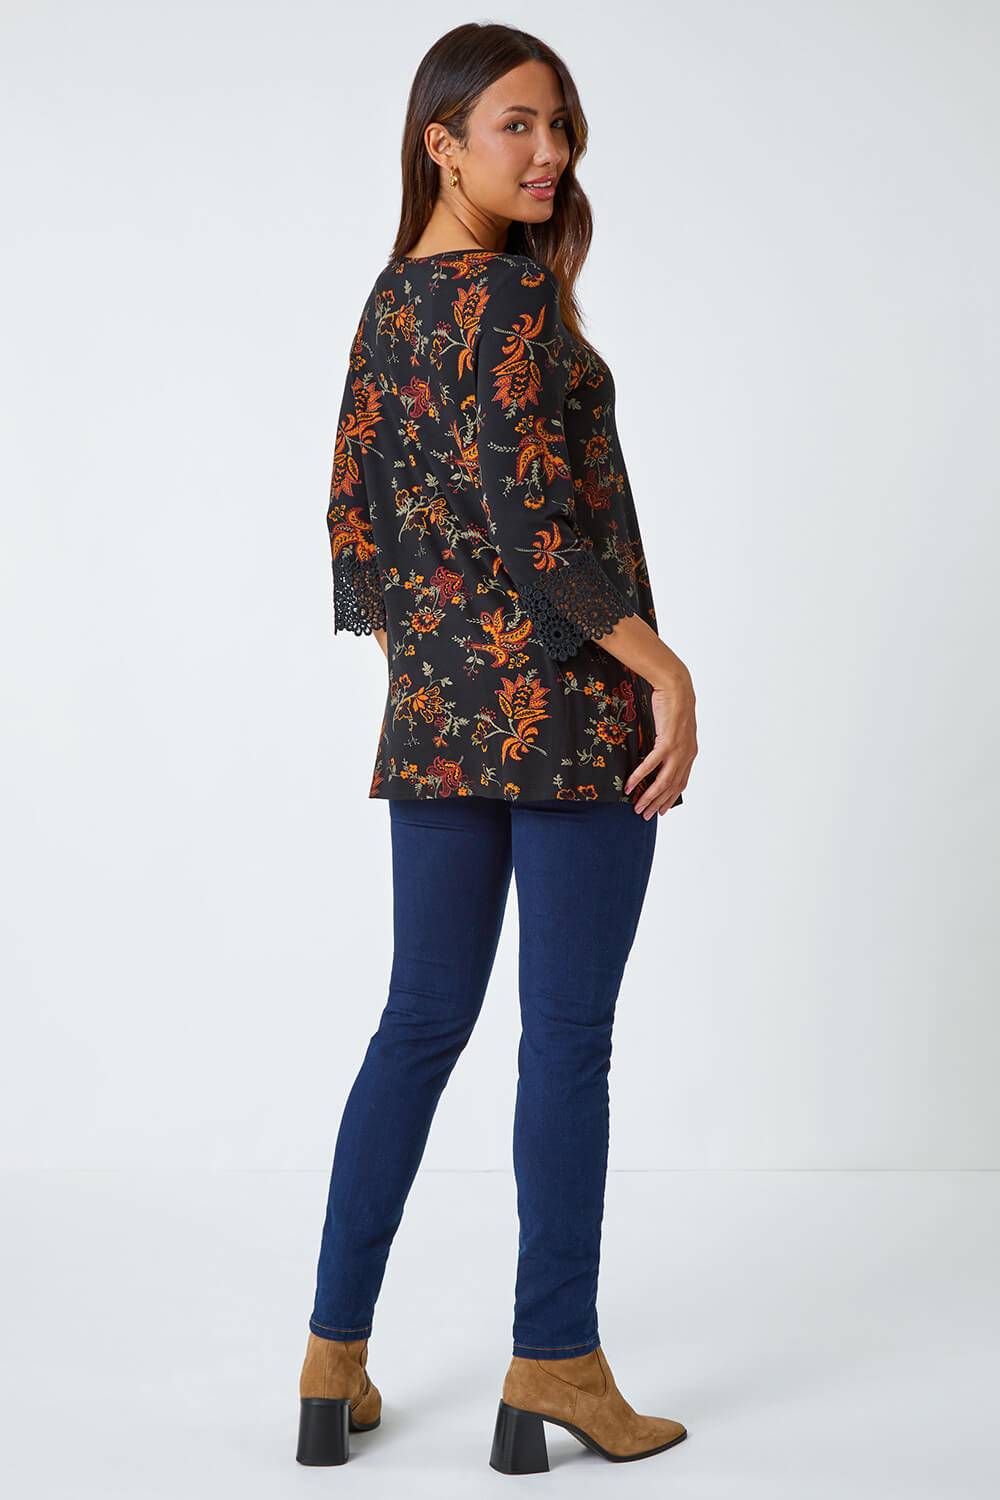 Ochre Paisley Print Lace Trim Stretch Top, Image 3 of 5